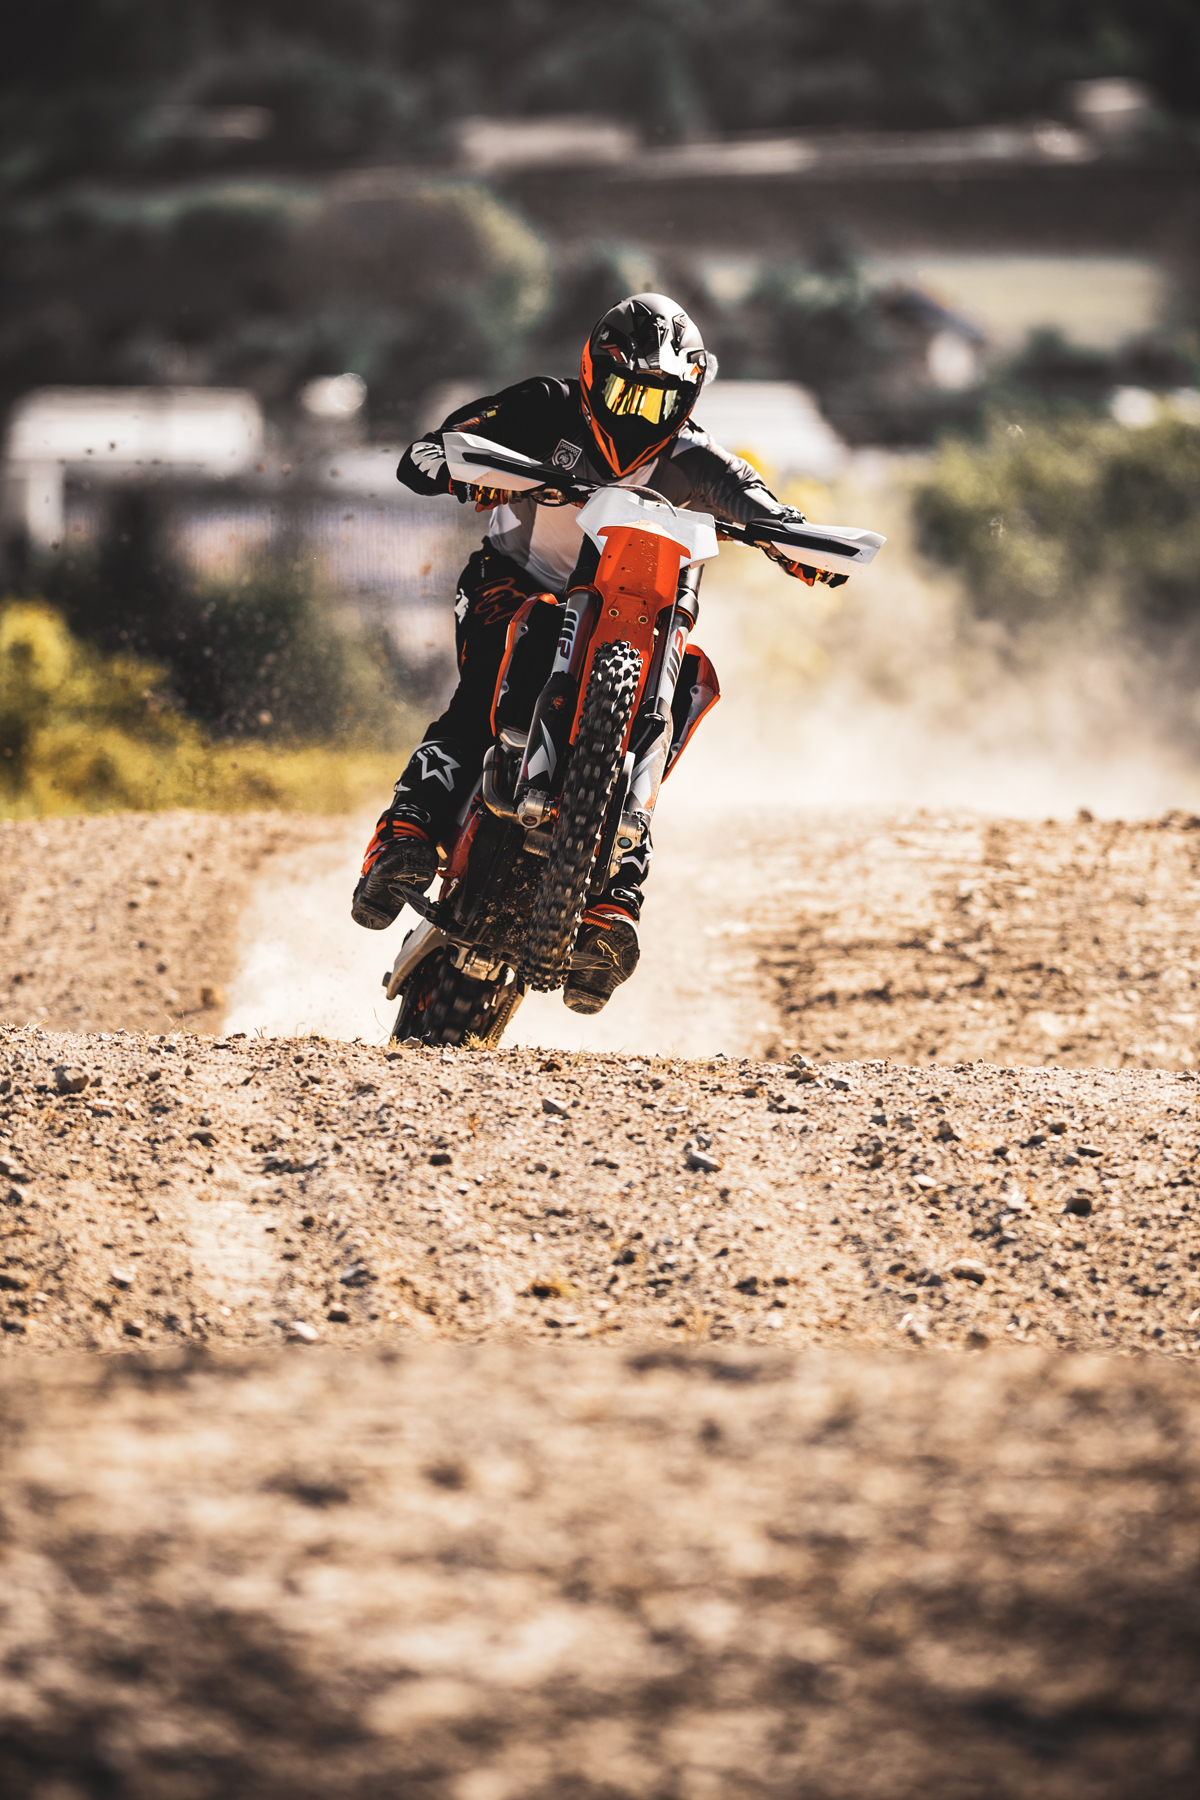 AVAILABLE NOW: THE myKTM APP & CONNECTIVITY UNIT KIT OFFER FACTORY BIKE  SET-UP AT THE TOUCH OF A BUTTON - KTM PRESS CENTER